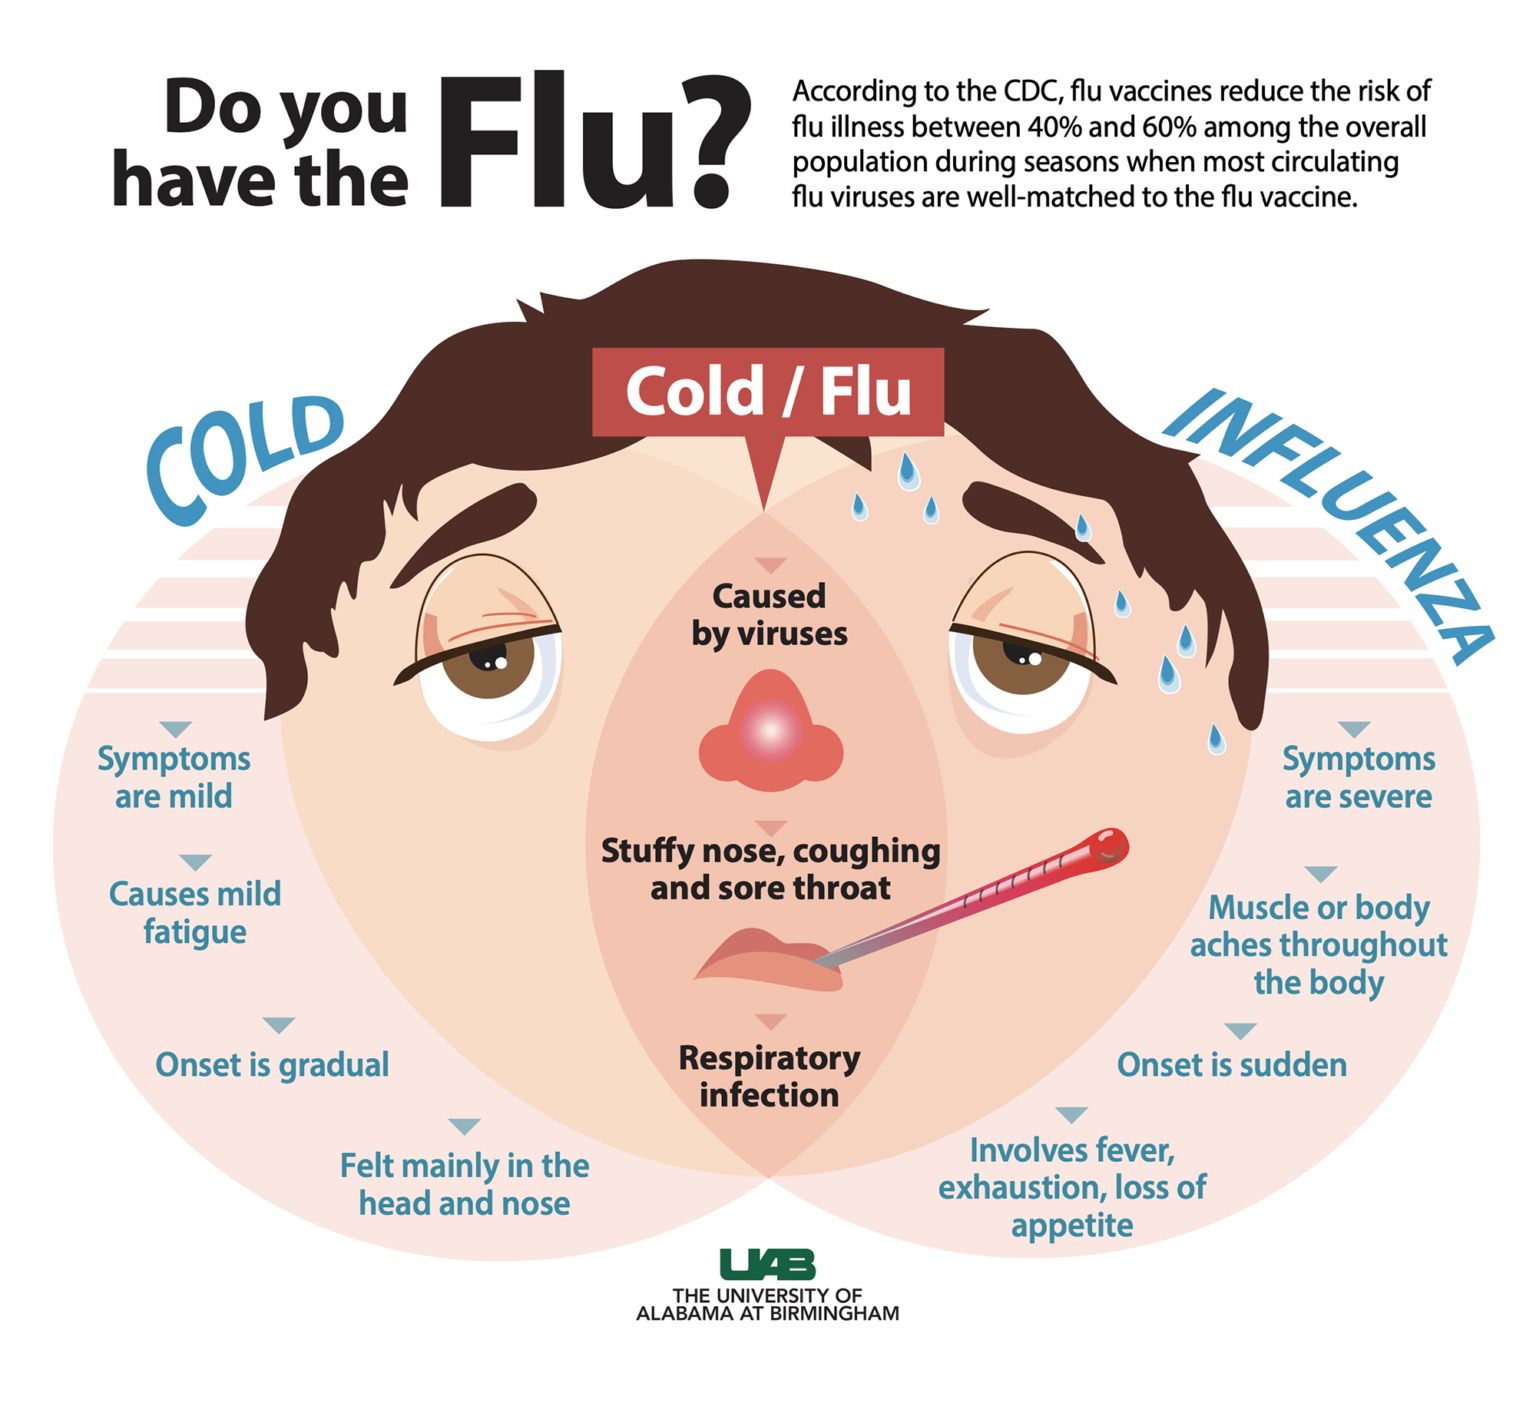 Influenza (flu) is a contagious respiratory illness caused by influenza